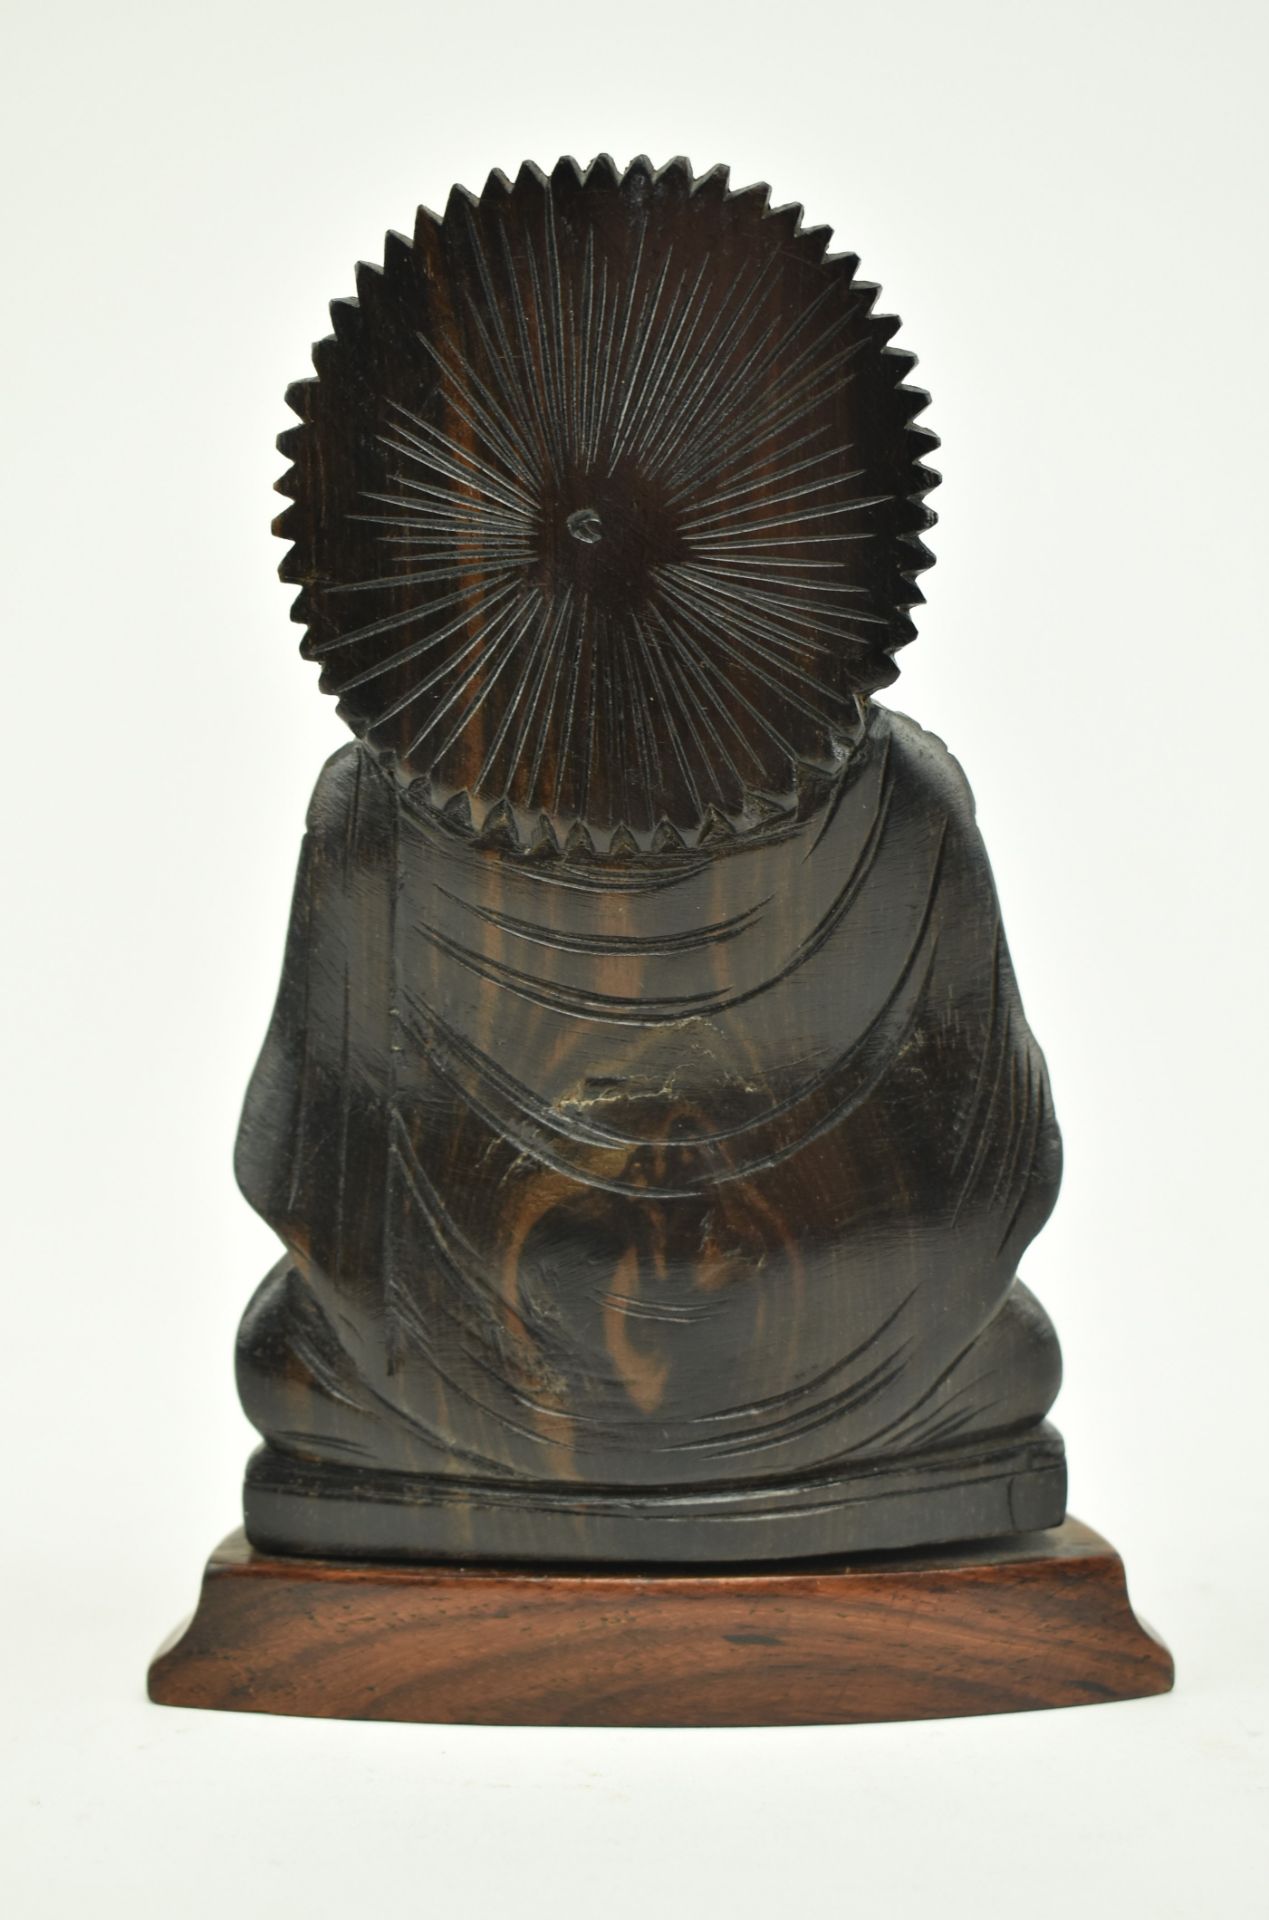 WOODEN CARVED FIGURINE OF A SEATED BUDDHA ON A PLINTH - Image 4 of 6